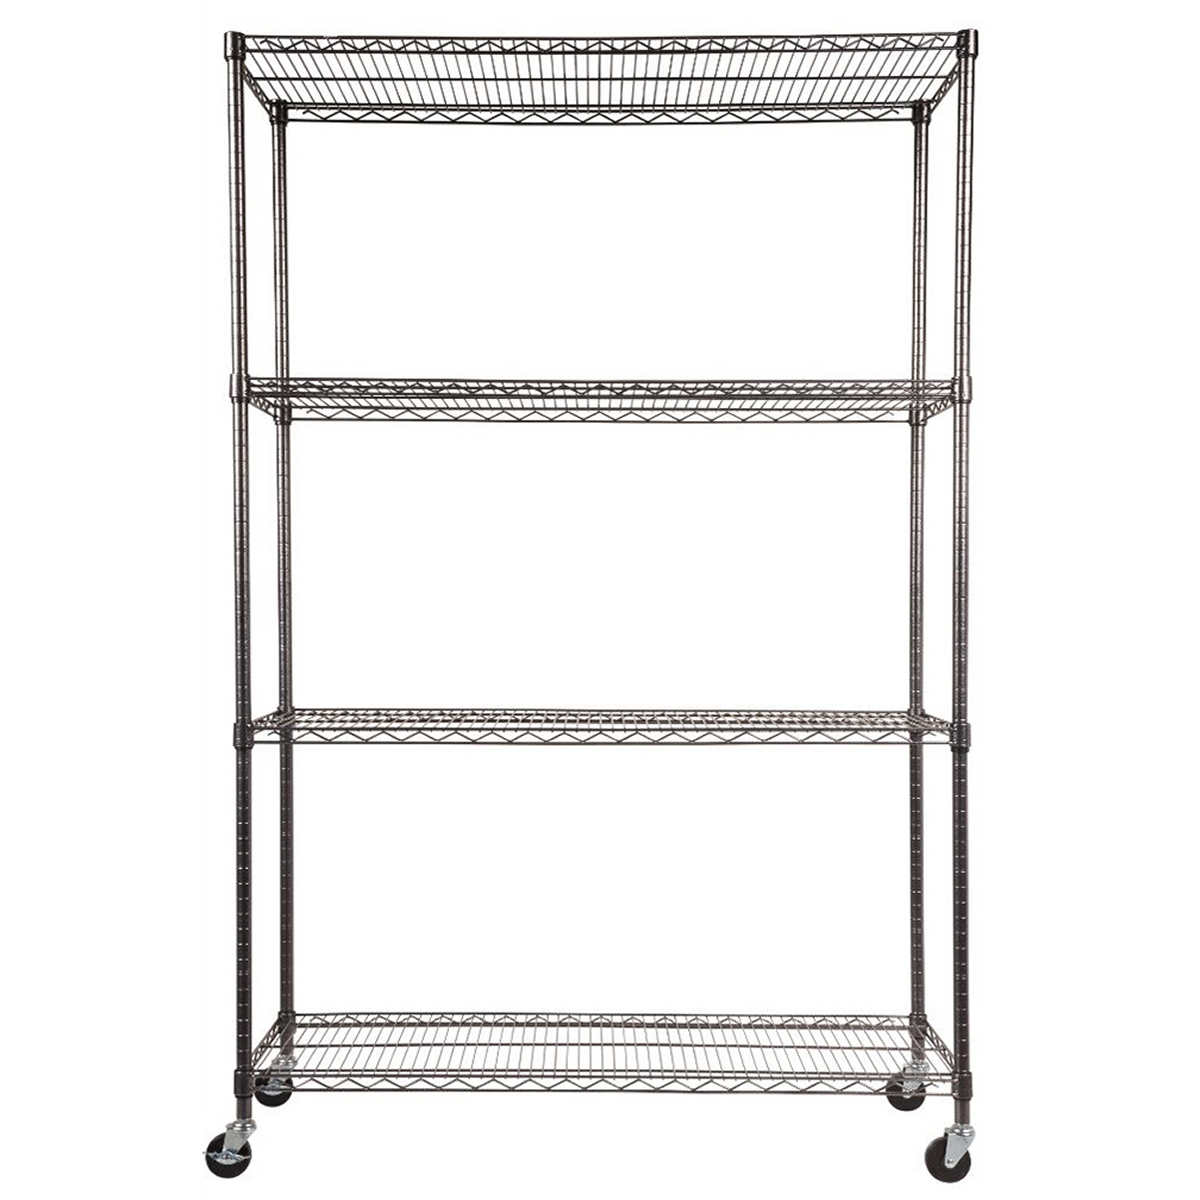 Alera 4 Shelf Industrial Wire Shelving, Alera Casters For Wire Shelving